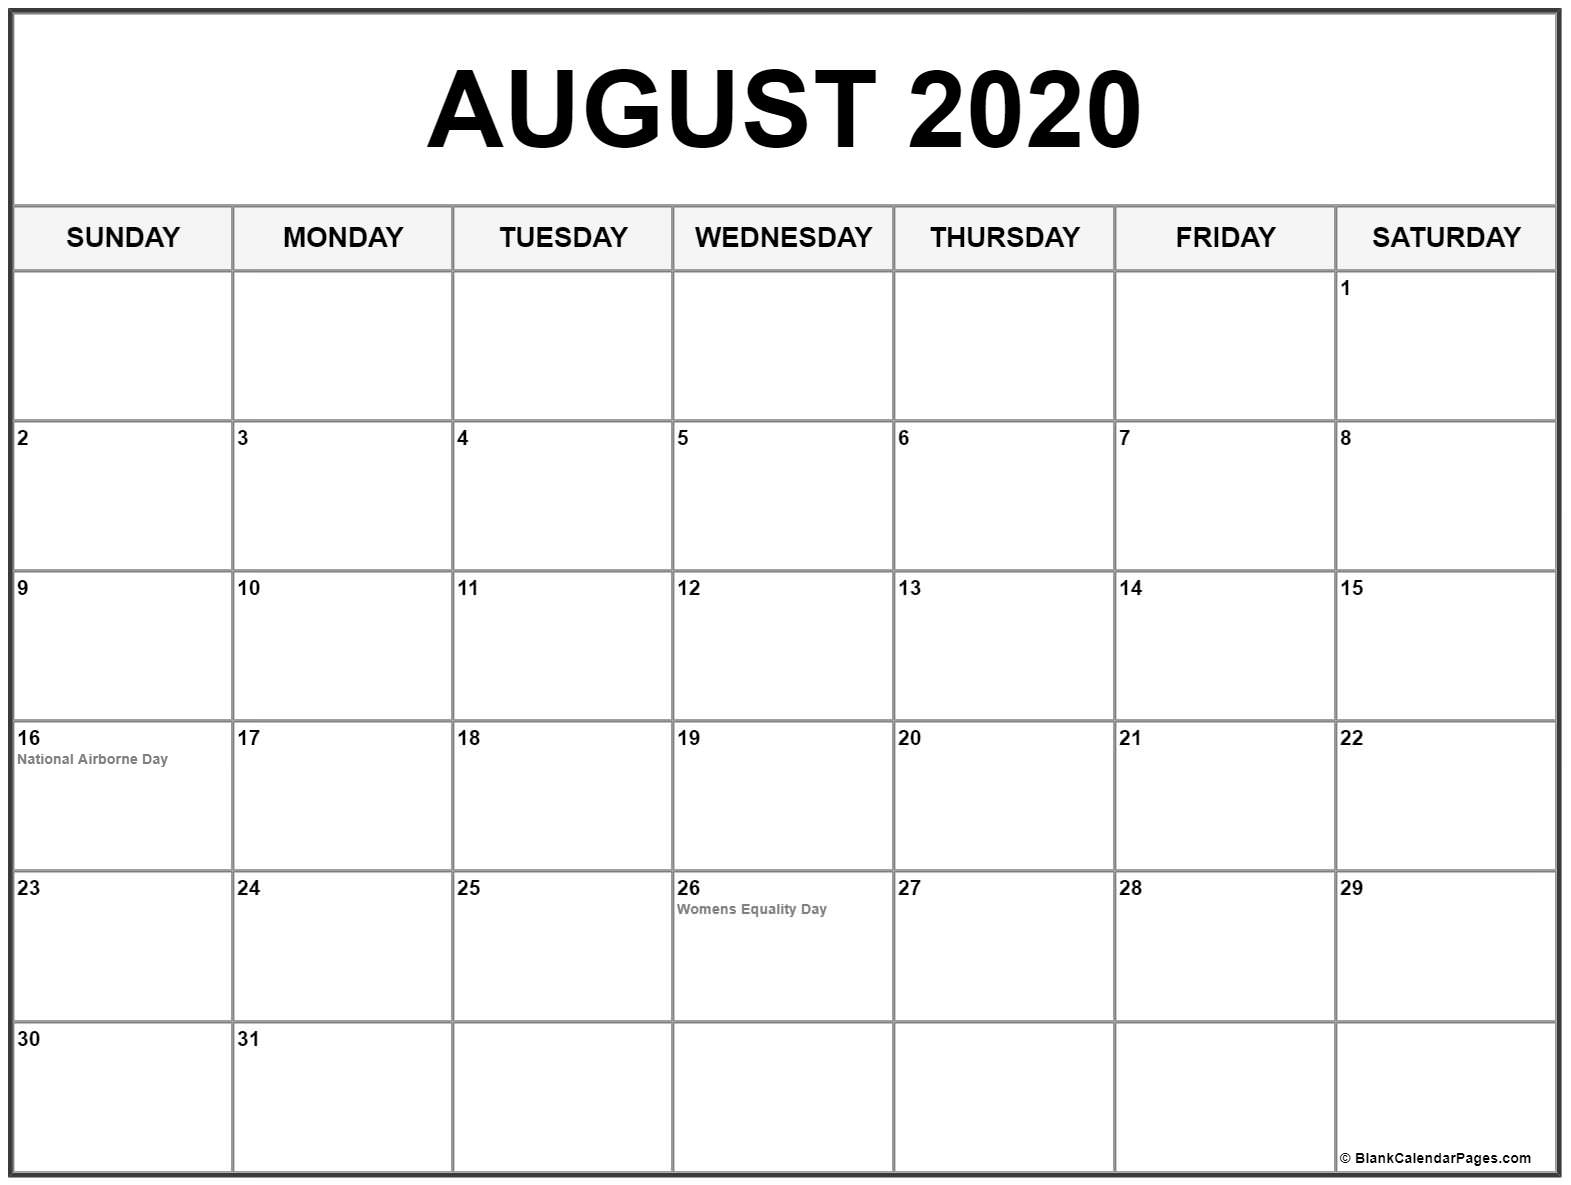 Collection Of August 2020 Calendars With Holidays Exceptional 2020 Calendar Showing Federal Holidays